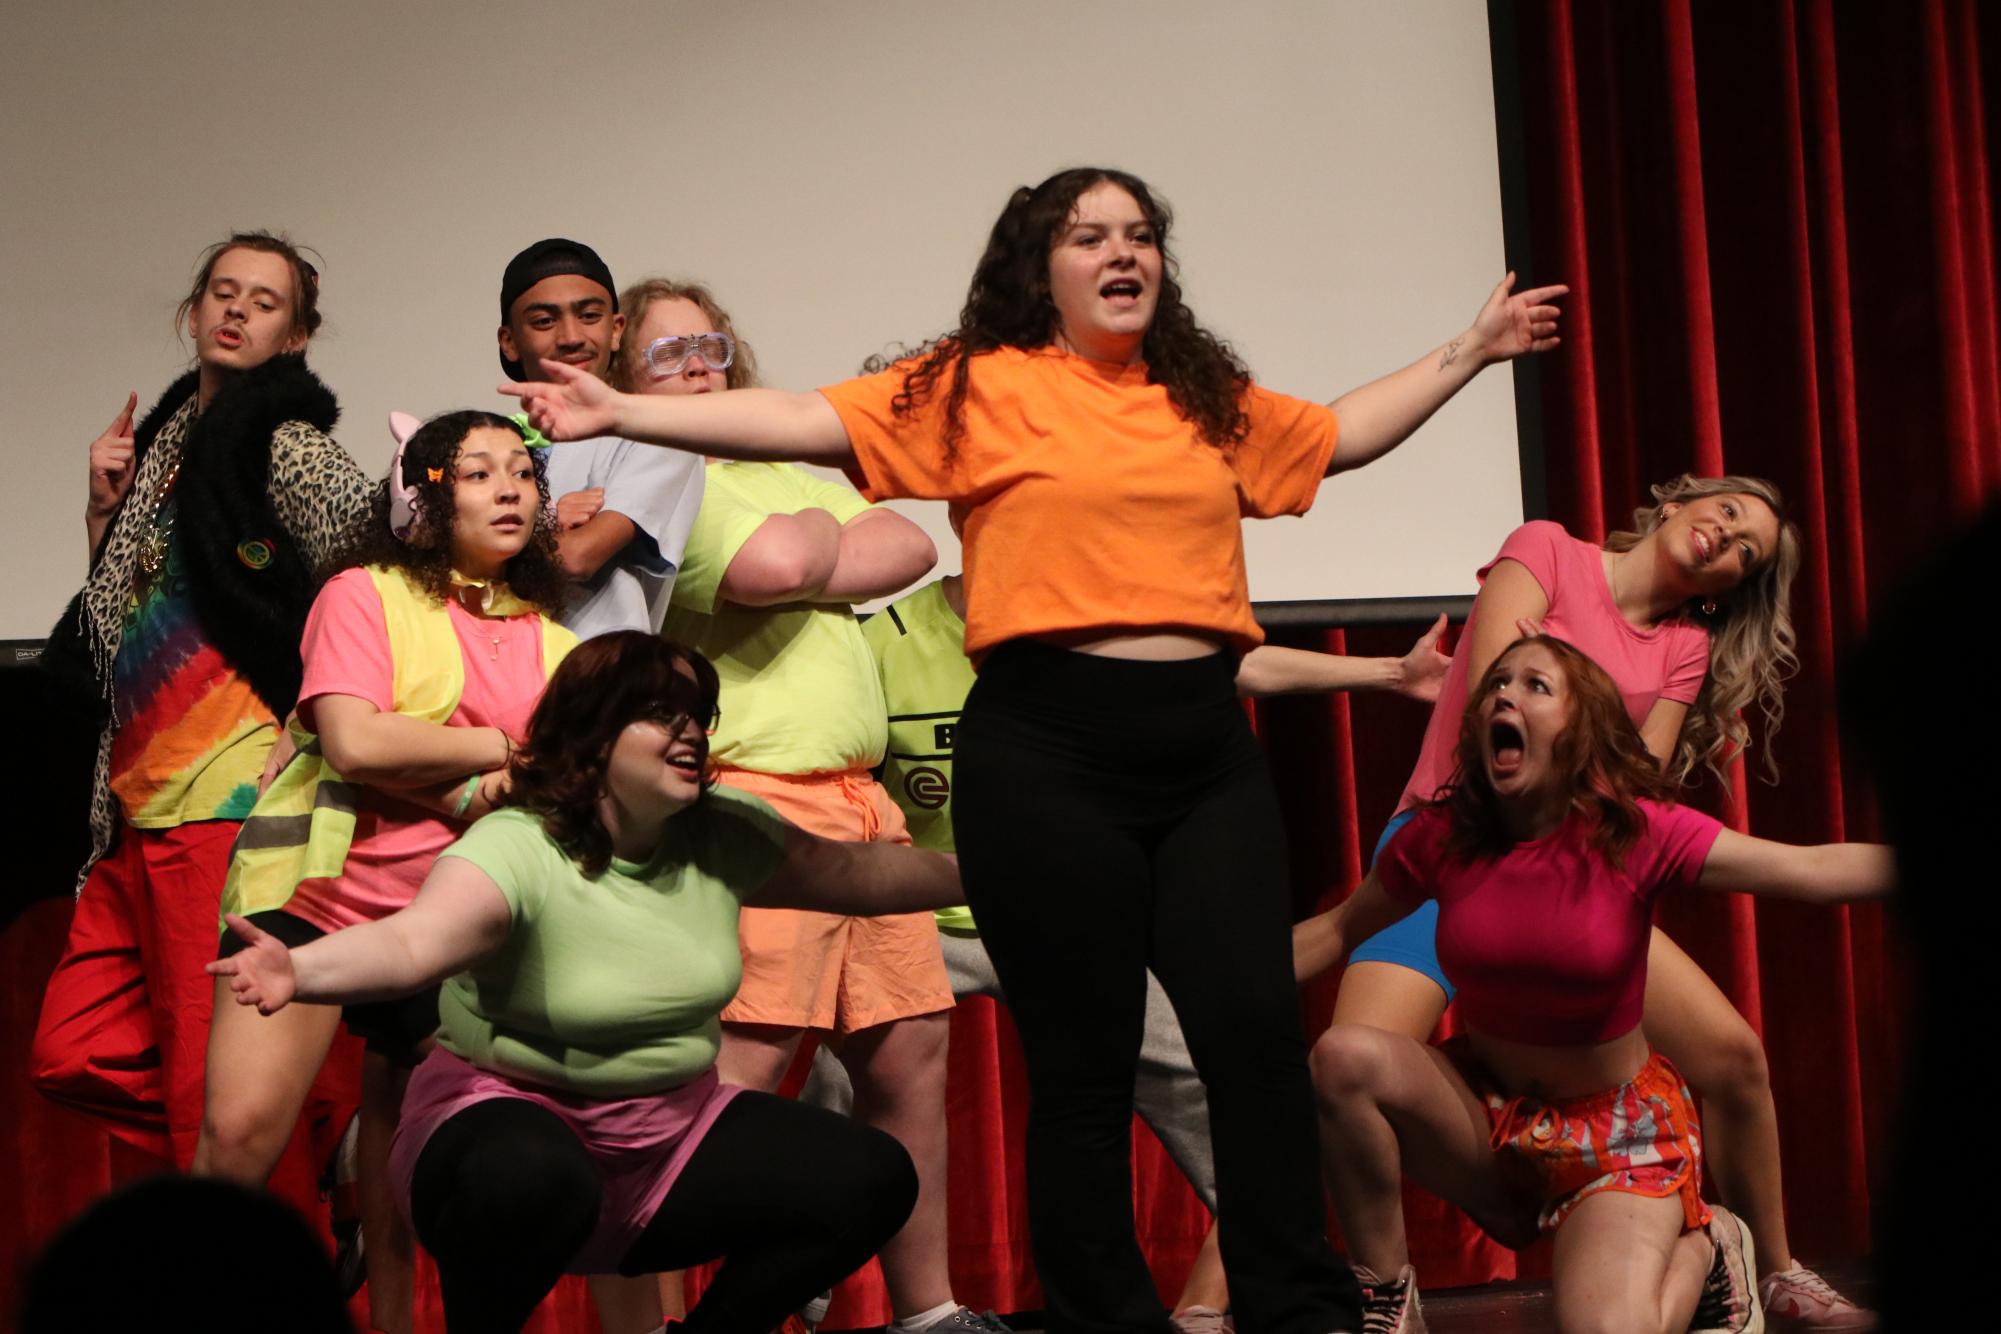 Contestants performed an opening dance number in neon outfits. Photo by Marissa Gergen.